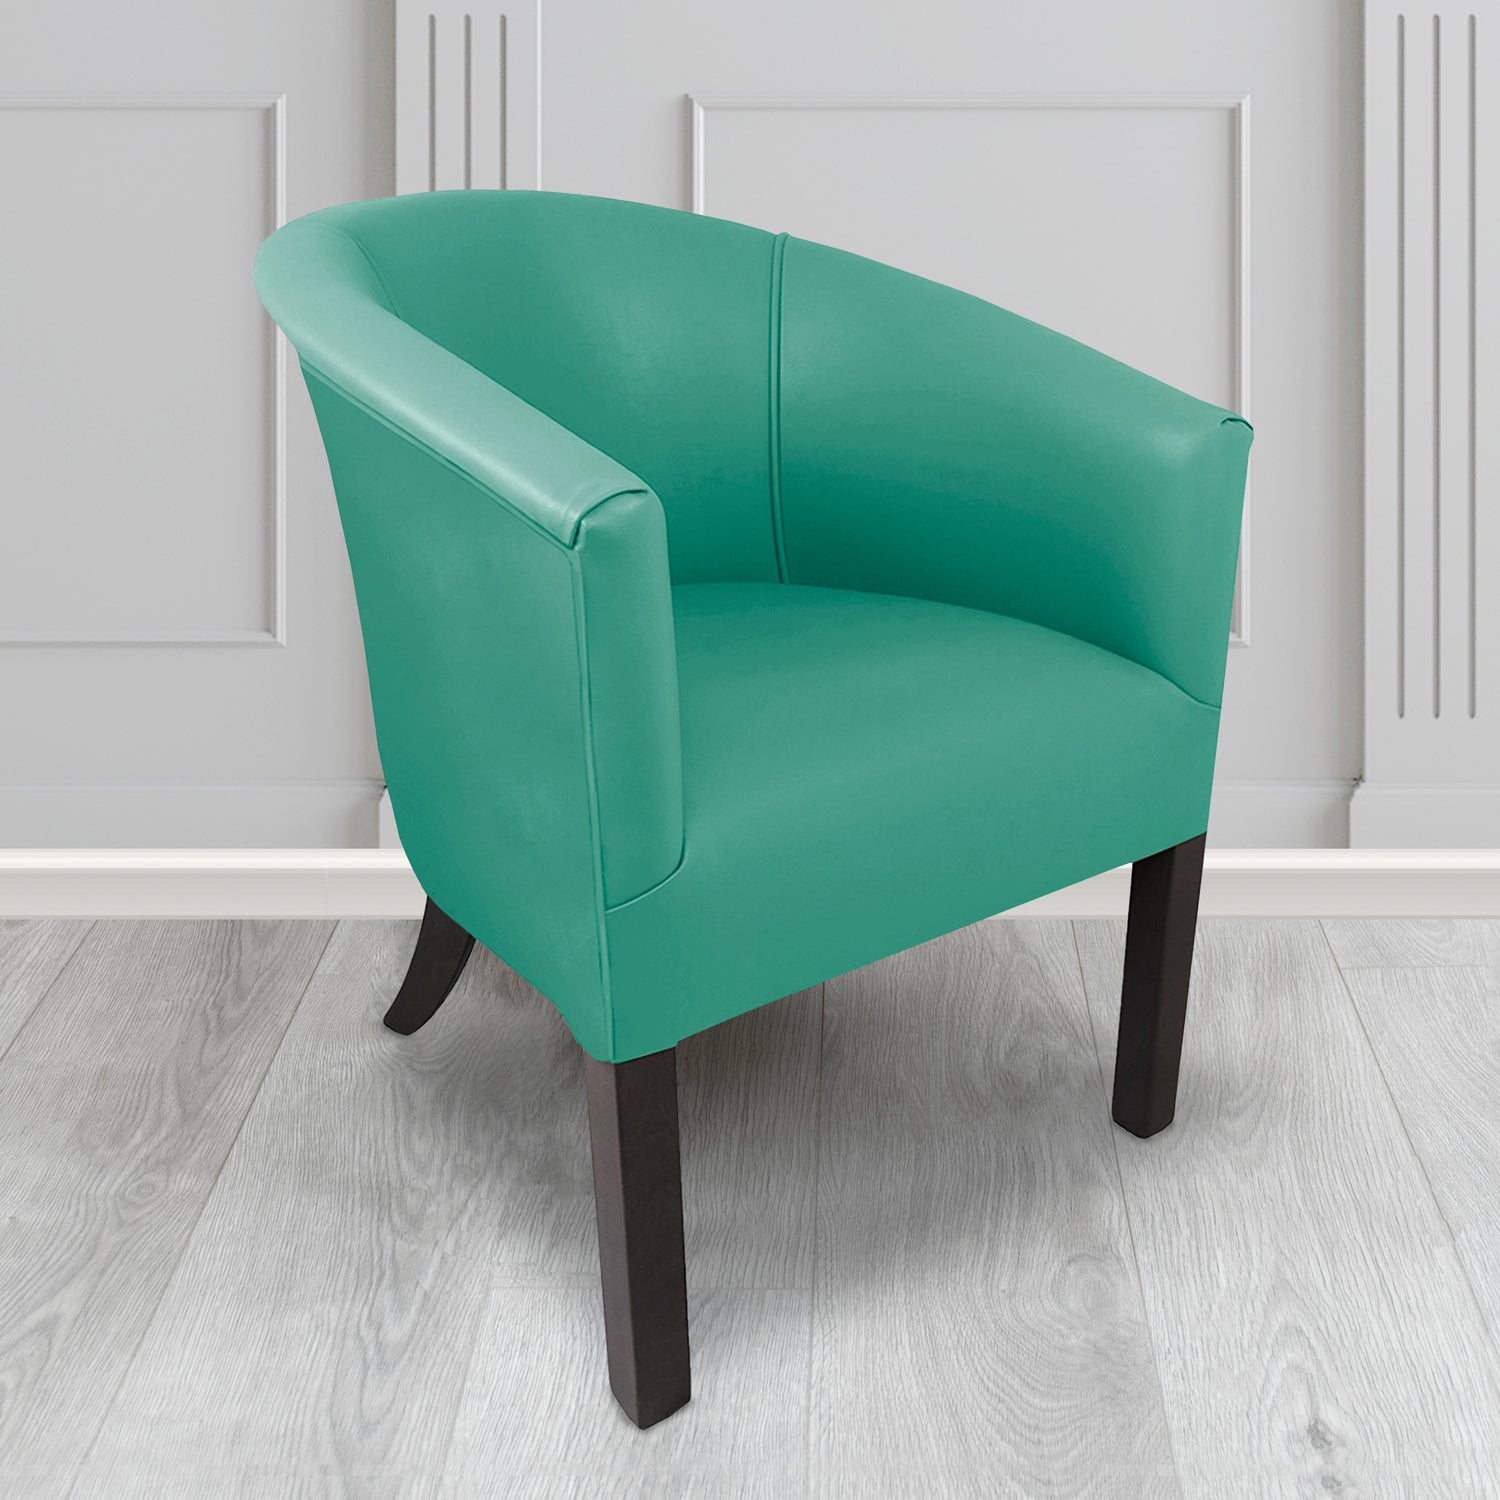 Lewisham Tub Chair in Agua Paint Pot Emerald Crib 5 Faux Leather - Antimicrobial, Stain Resistant & Waterproof - The Tub Chair Shop